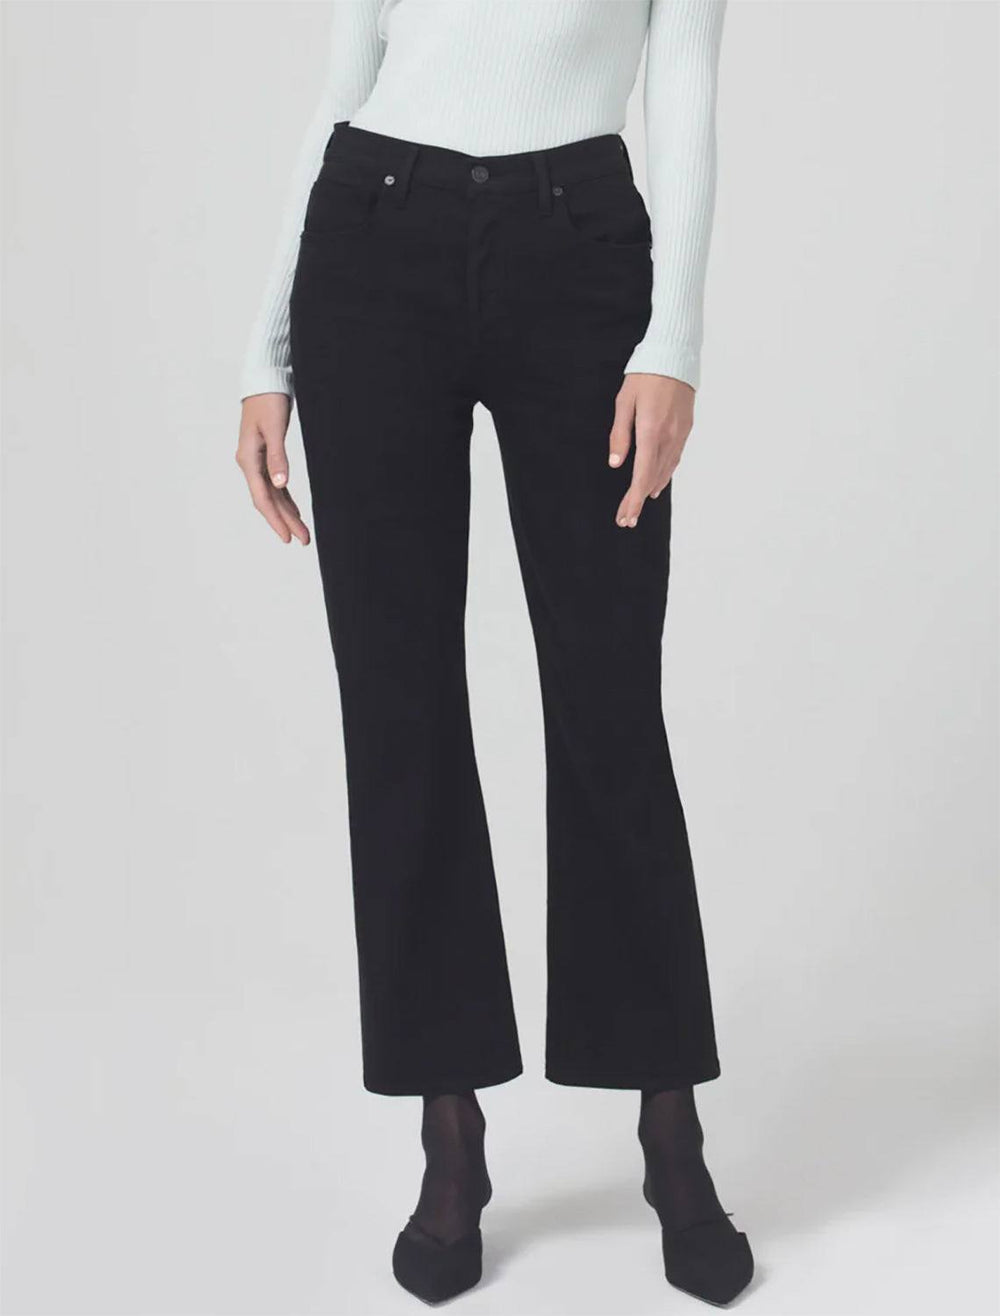 Model wearing Citizen of Humanity's Isola Cropped Boot in Plush Black. Model pairs the pants with a light blue ribbed long sleeve shirt and black heels.